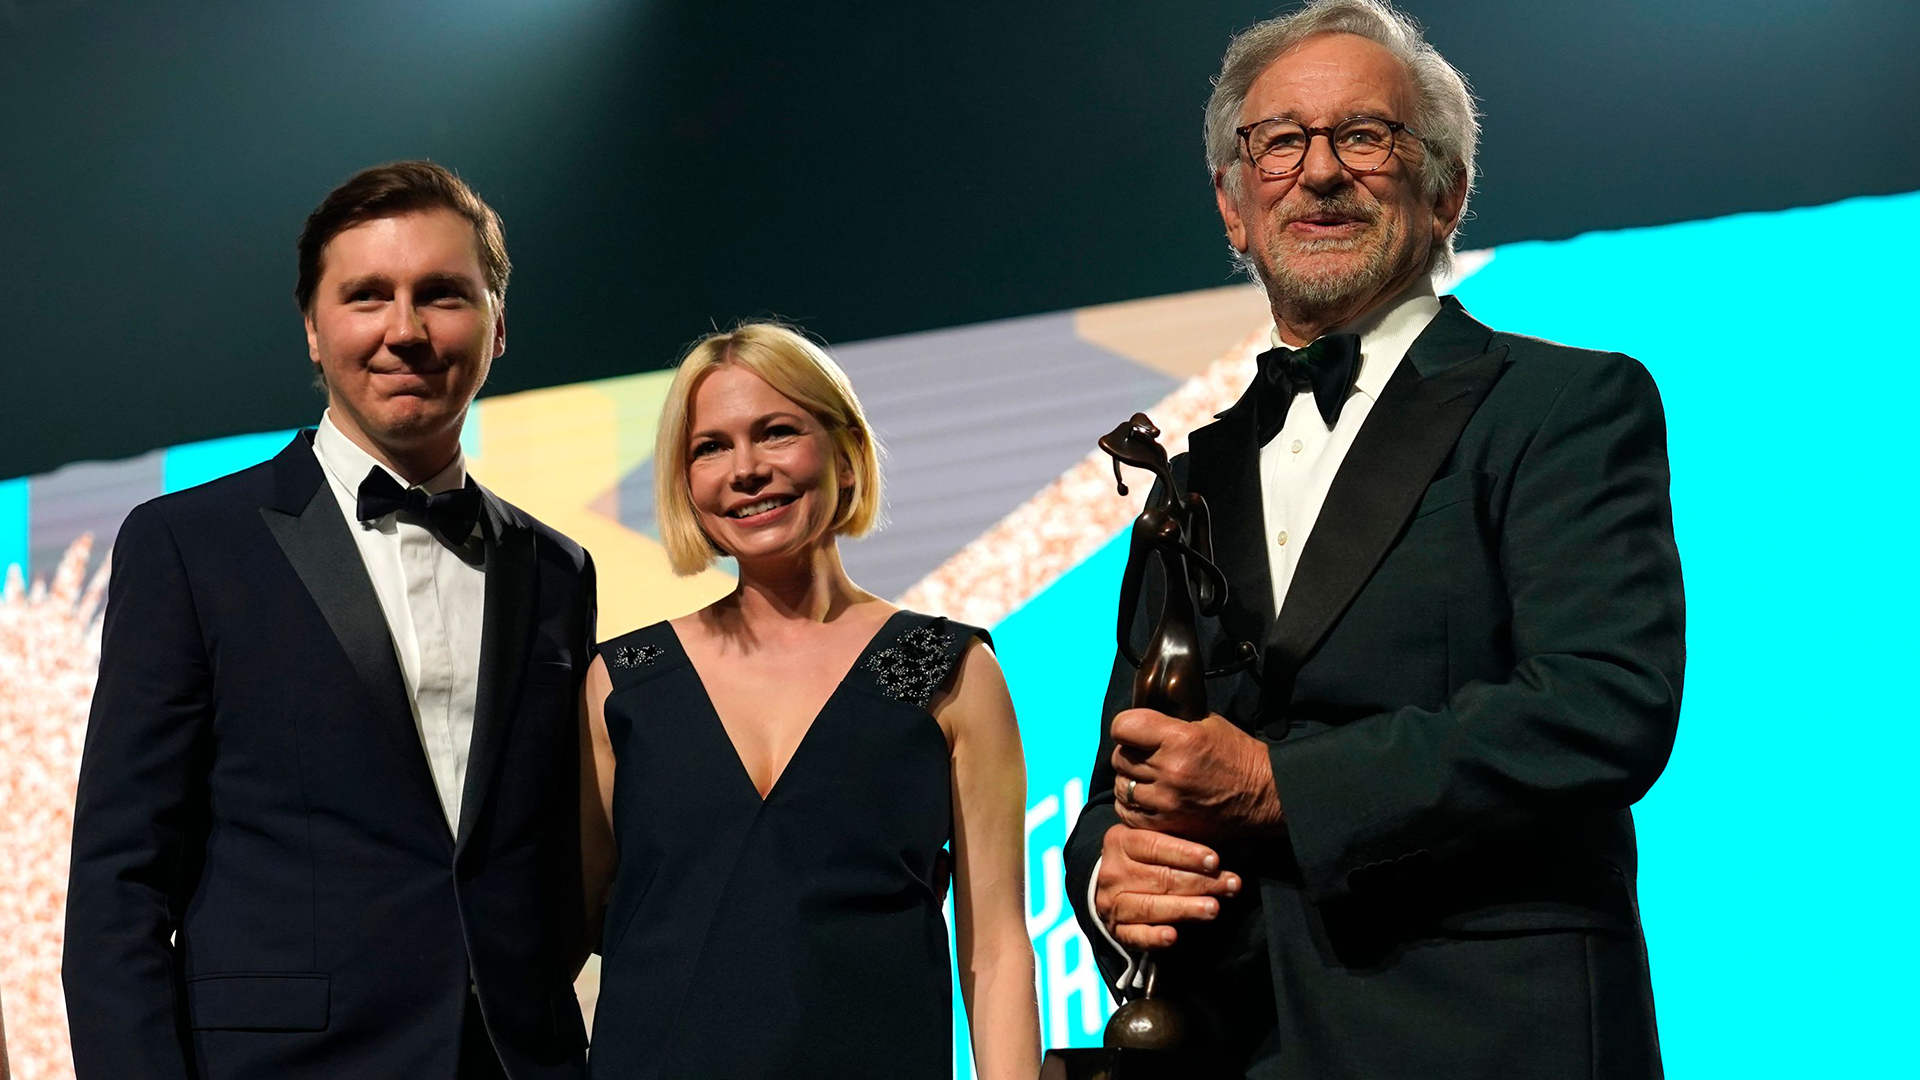 Paul Dano with Fabelmans co-star Michelle Williams and Steven Spielberg